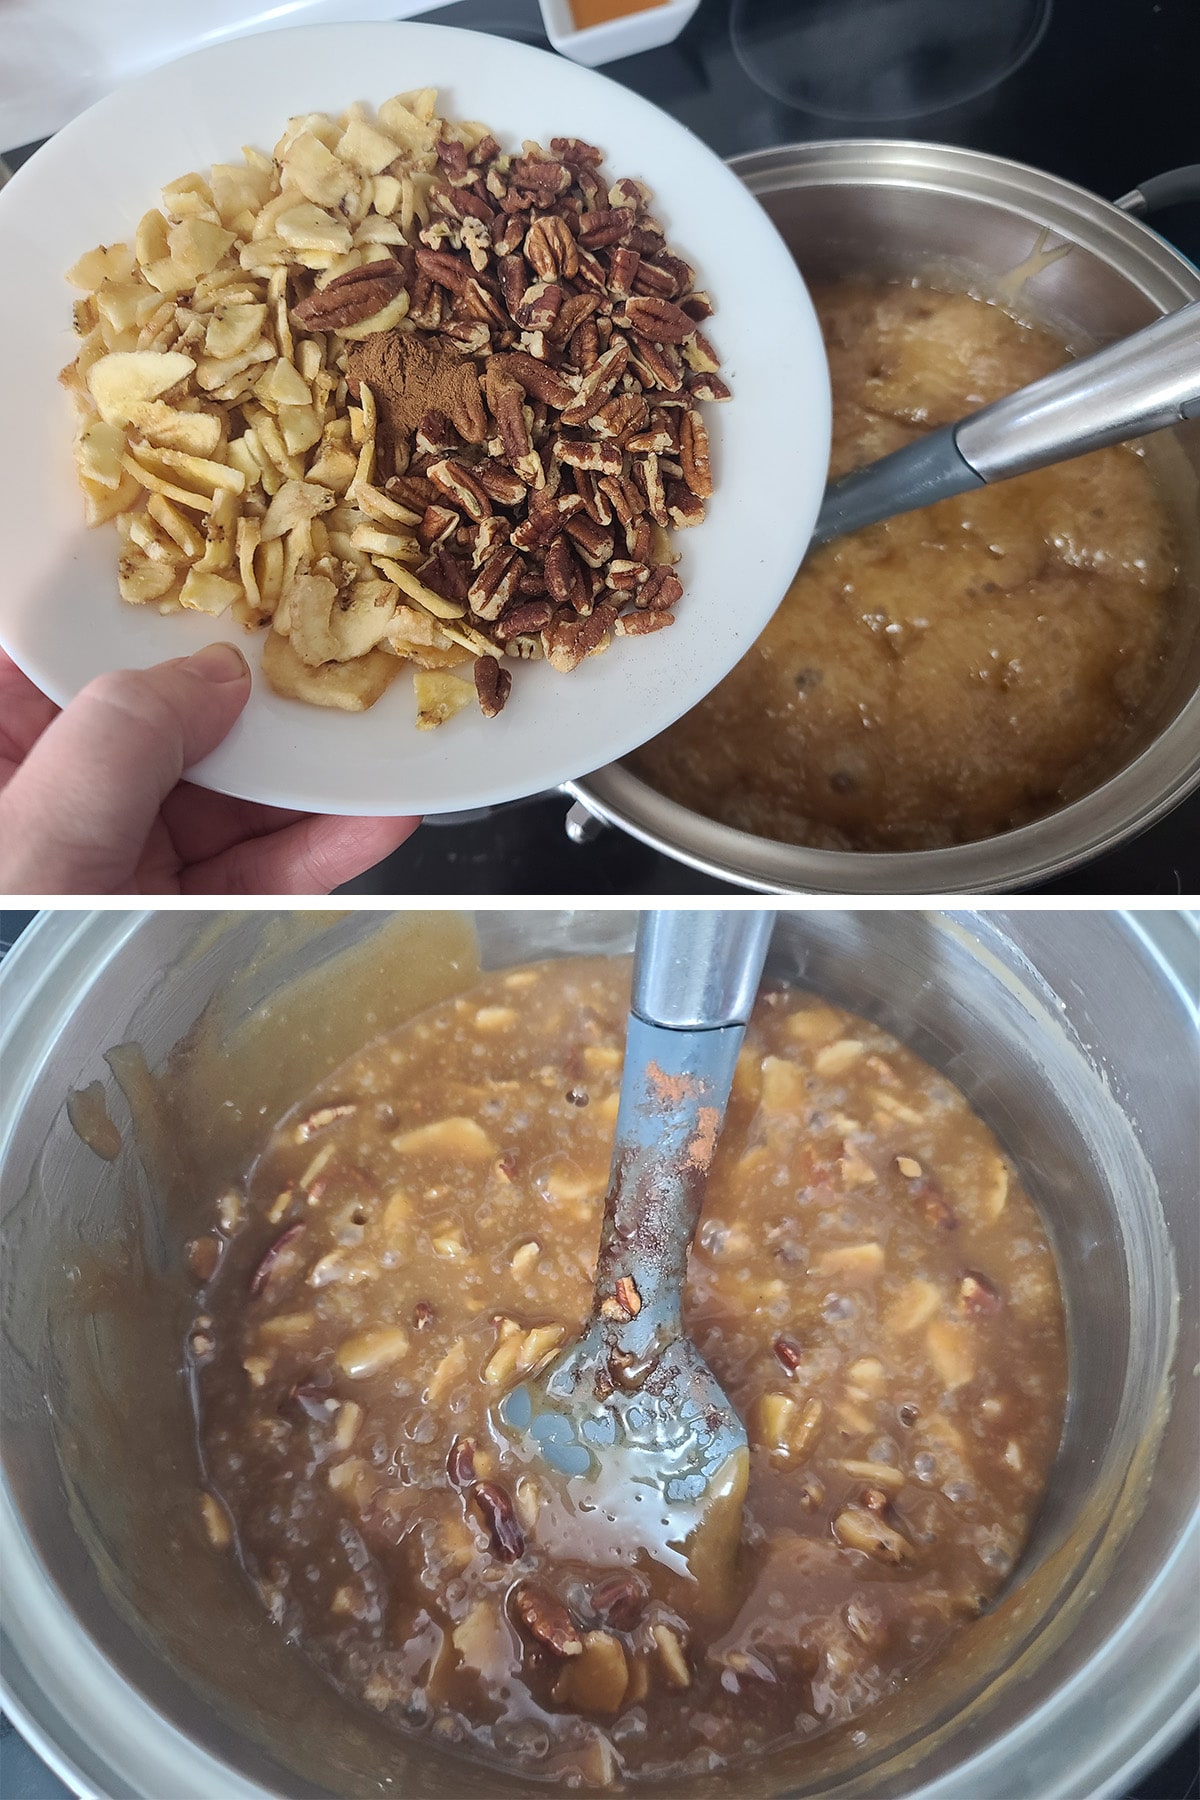 Nuts and banana chips being stirred into the sugar mixture.